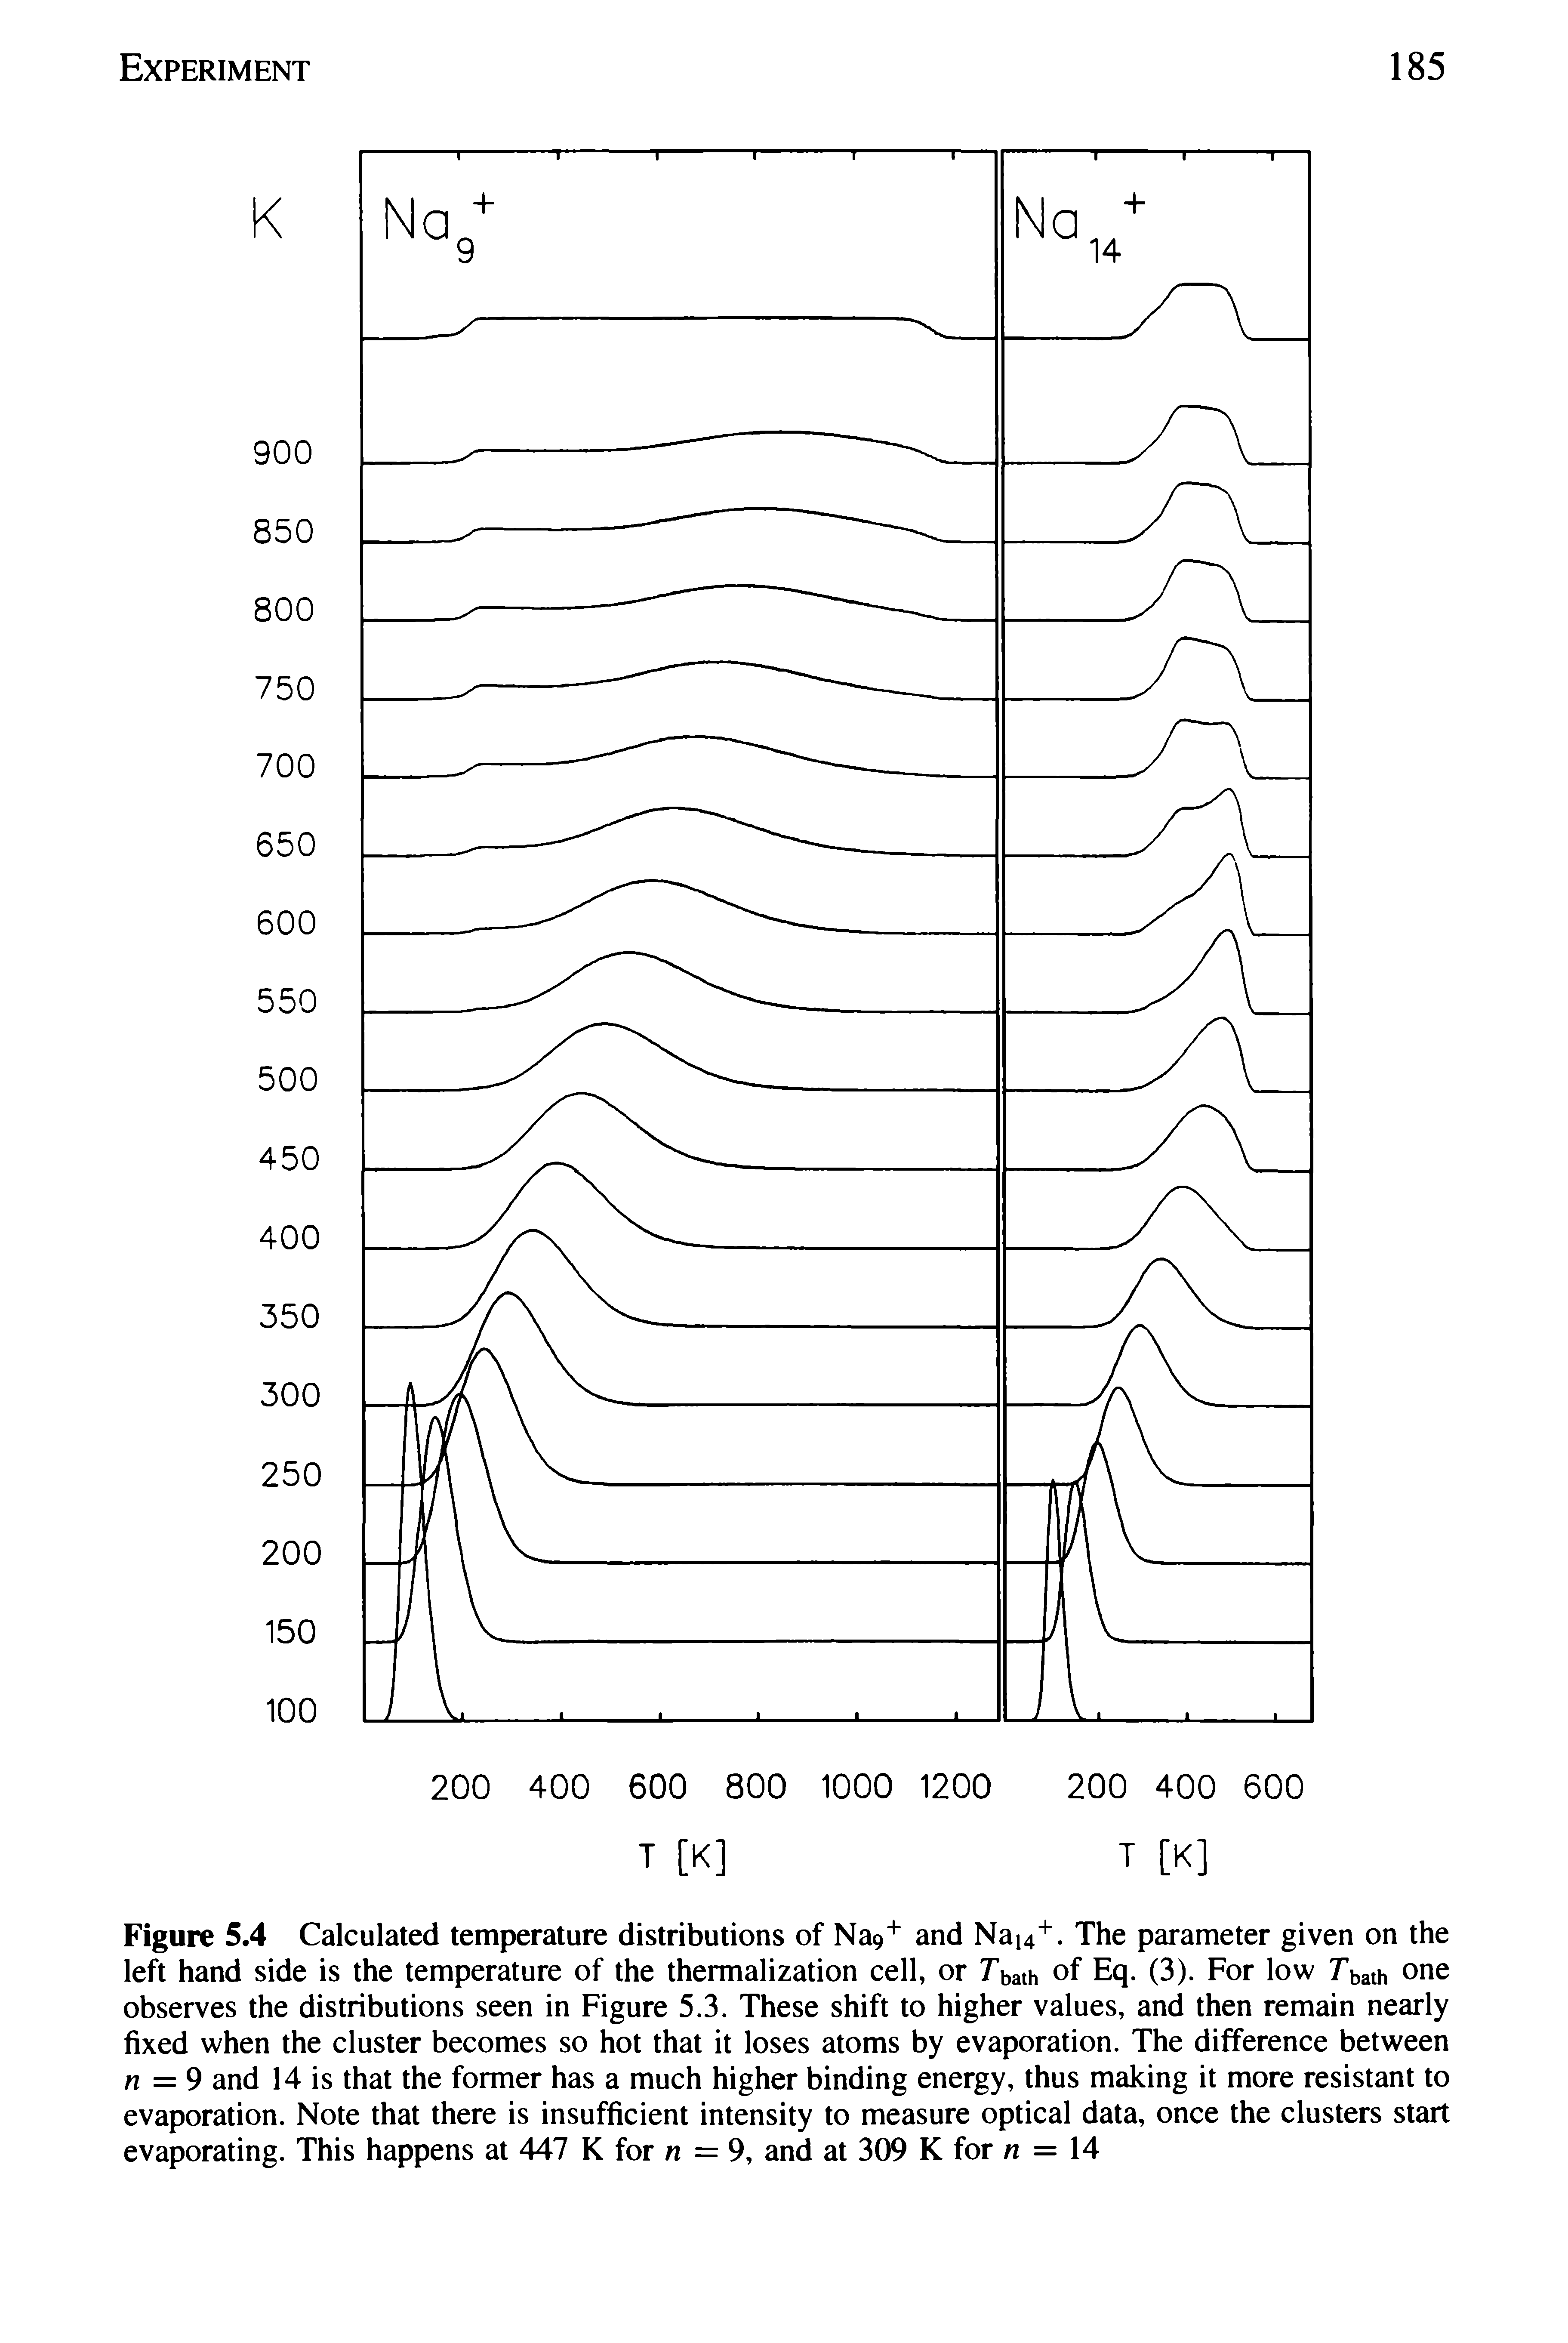 Figure 5.4 Calculated temperature distributions of NaQ and Nai4+. The parameter given on the left hand side is the temperature of the thermalization cell, or Tbath of Eq. (3). For low Tbath one observes the distributions seen in Figure 5.3. These shift to higher values, and then remain nearly fixed when the cluster becomes so hot that it loses atoms by evaporation. The difference between n = 9 and 14 is that the former has a much higher binding energy, thus making it more resistant to evaporation. Note that there is insufficient intensity to measure optical data, once the clusters start evaporating. This happens at 447 K for /i = 9, and at 309 K for = 14...